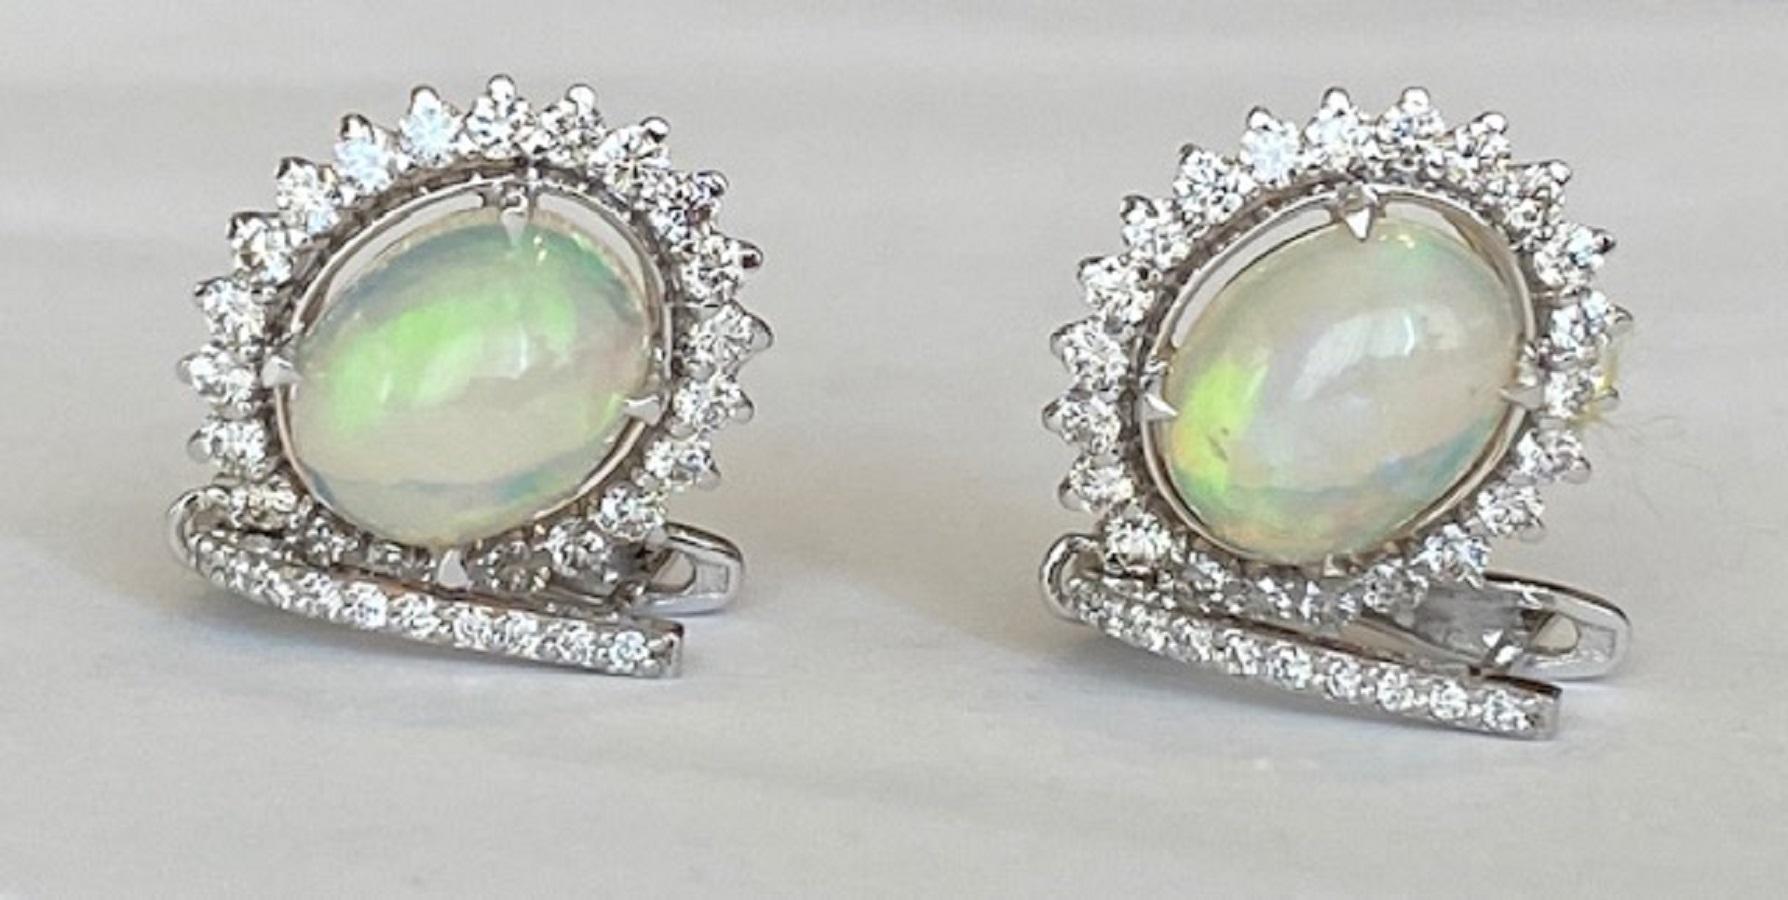 Brilliant Cut 18 Kt. White Gold Earrings with 4.15 Ct Opals and Diamonds